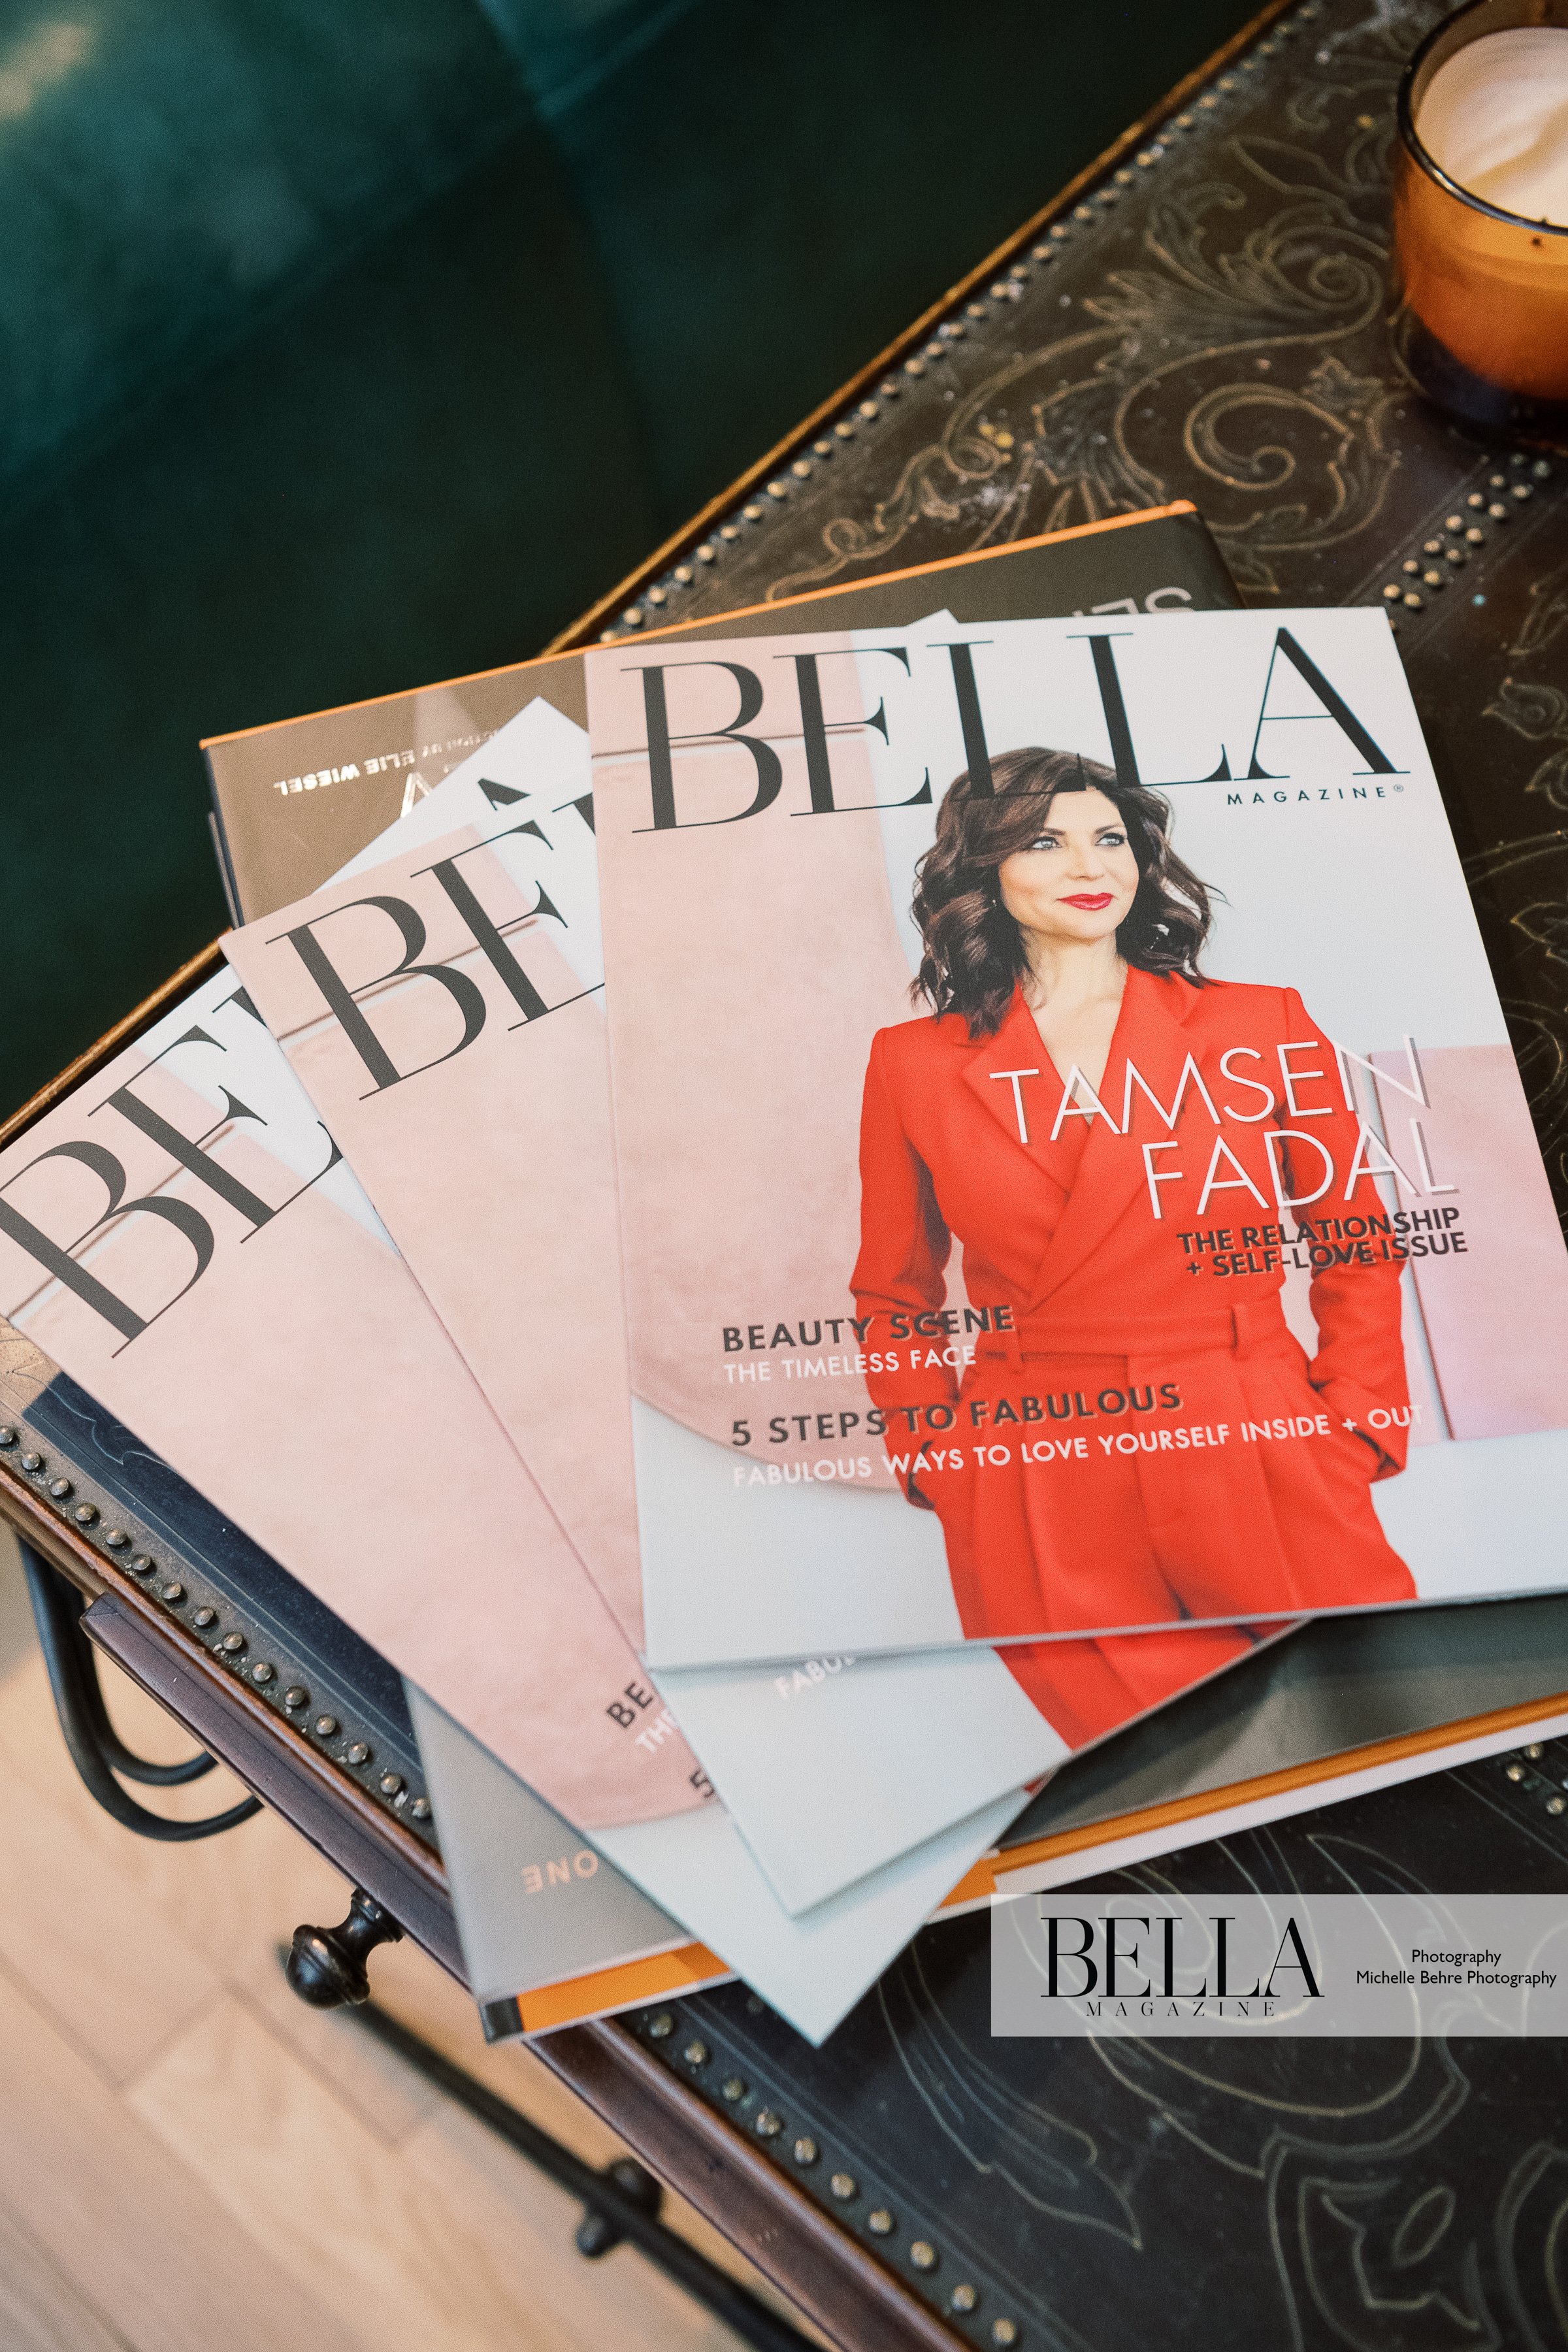 Michelle-Behre-Photography-Watermarked-2024-BELLA-MAGAZINE-BELLA-AT-Relationship-Issue-Cover-Party-Helen-Yarmak-15.jpg